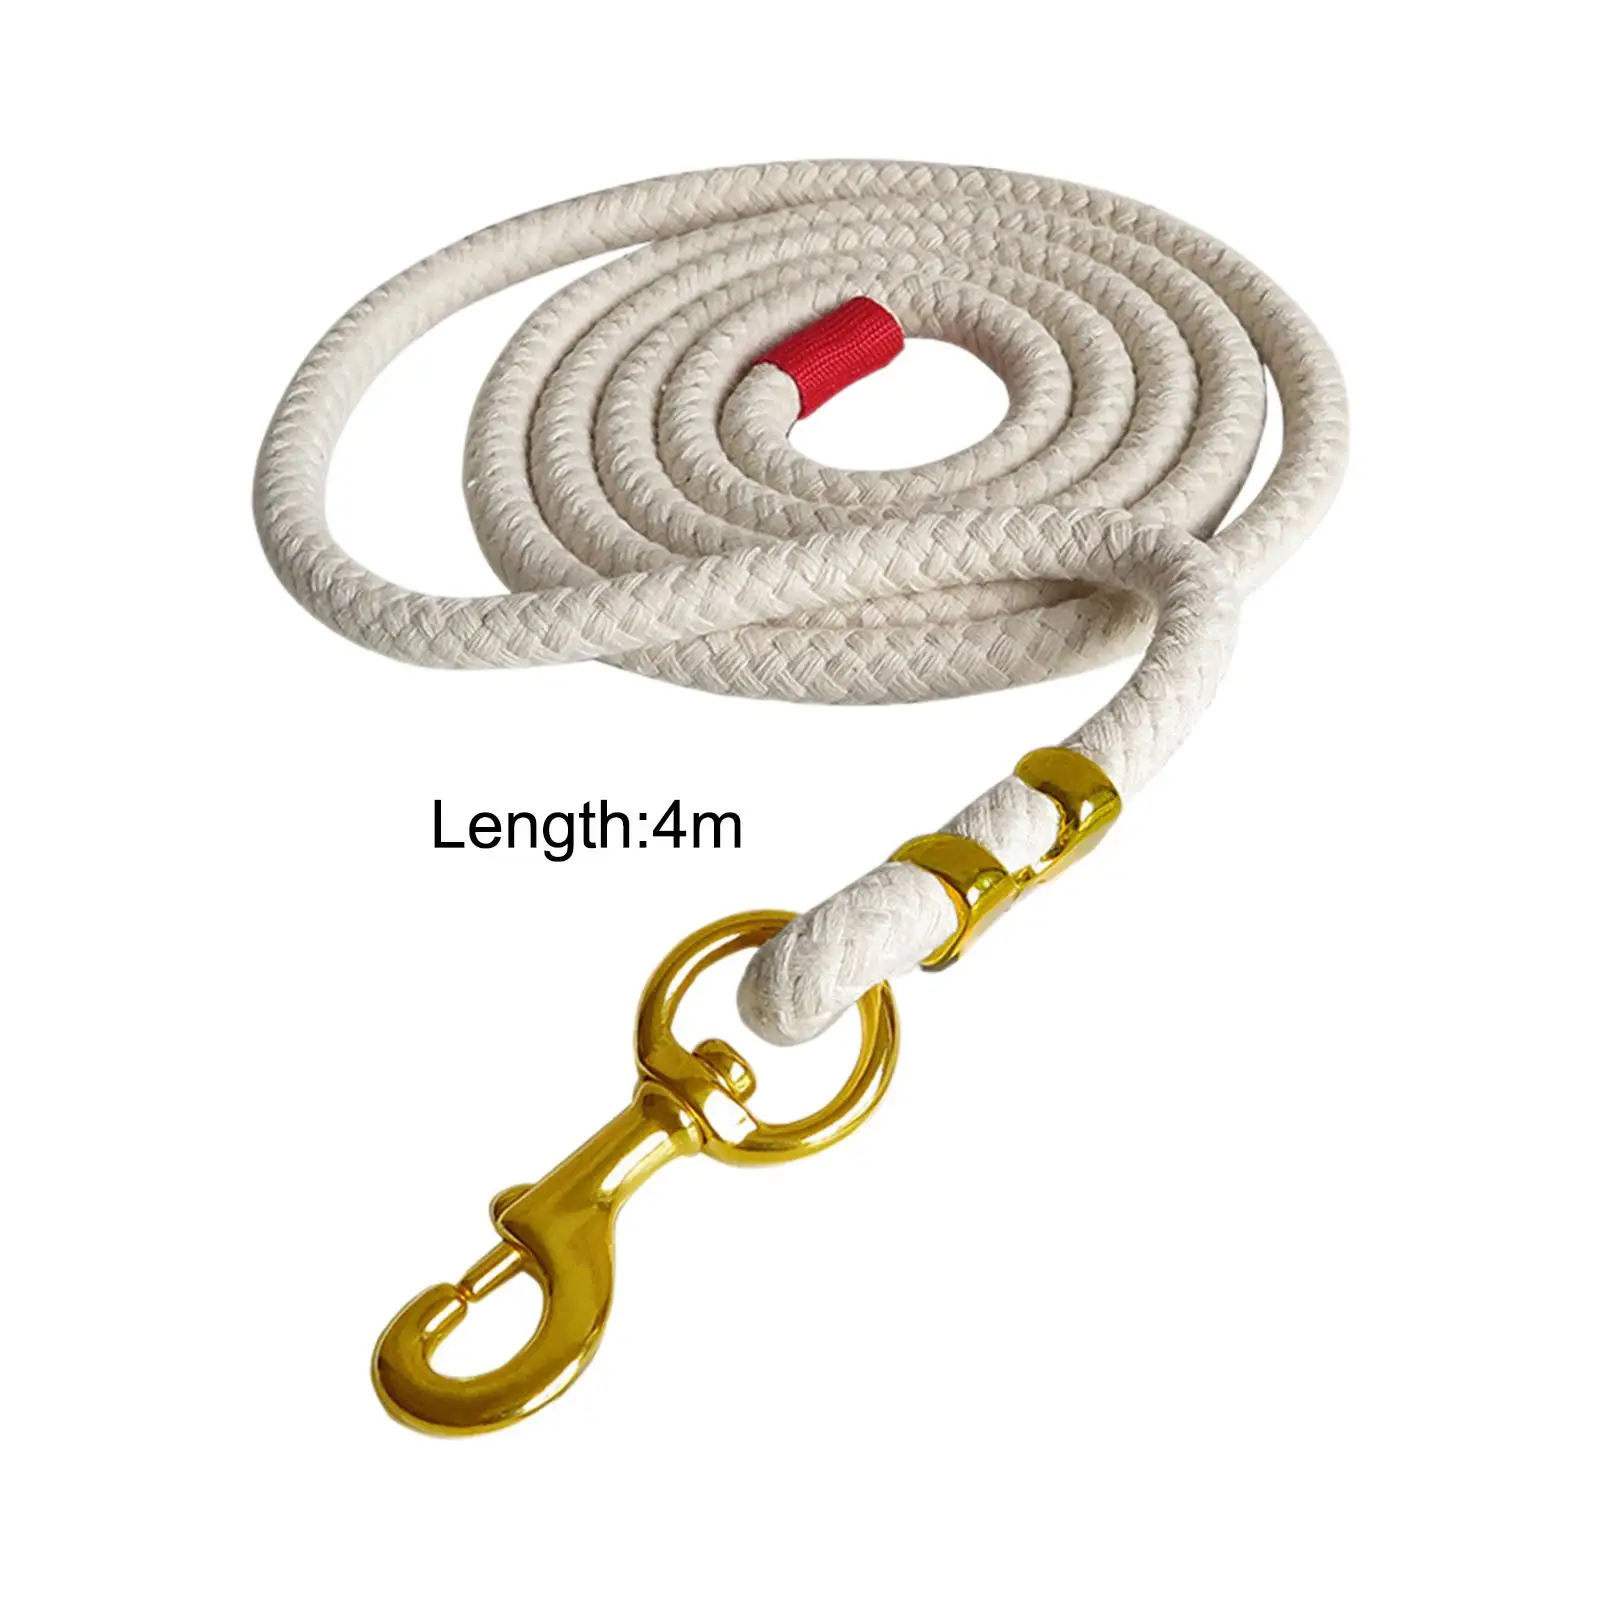 Horse Lead Rope Heavy Duty Long Attach to Halter or Harness for Livestock with Bolt Snap Equestrian Equipment Braided Horse Rope